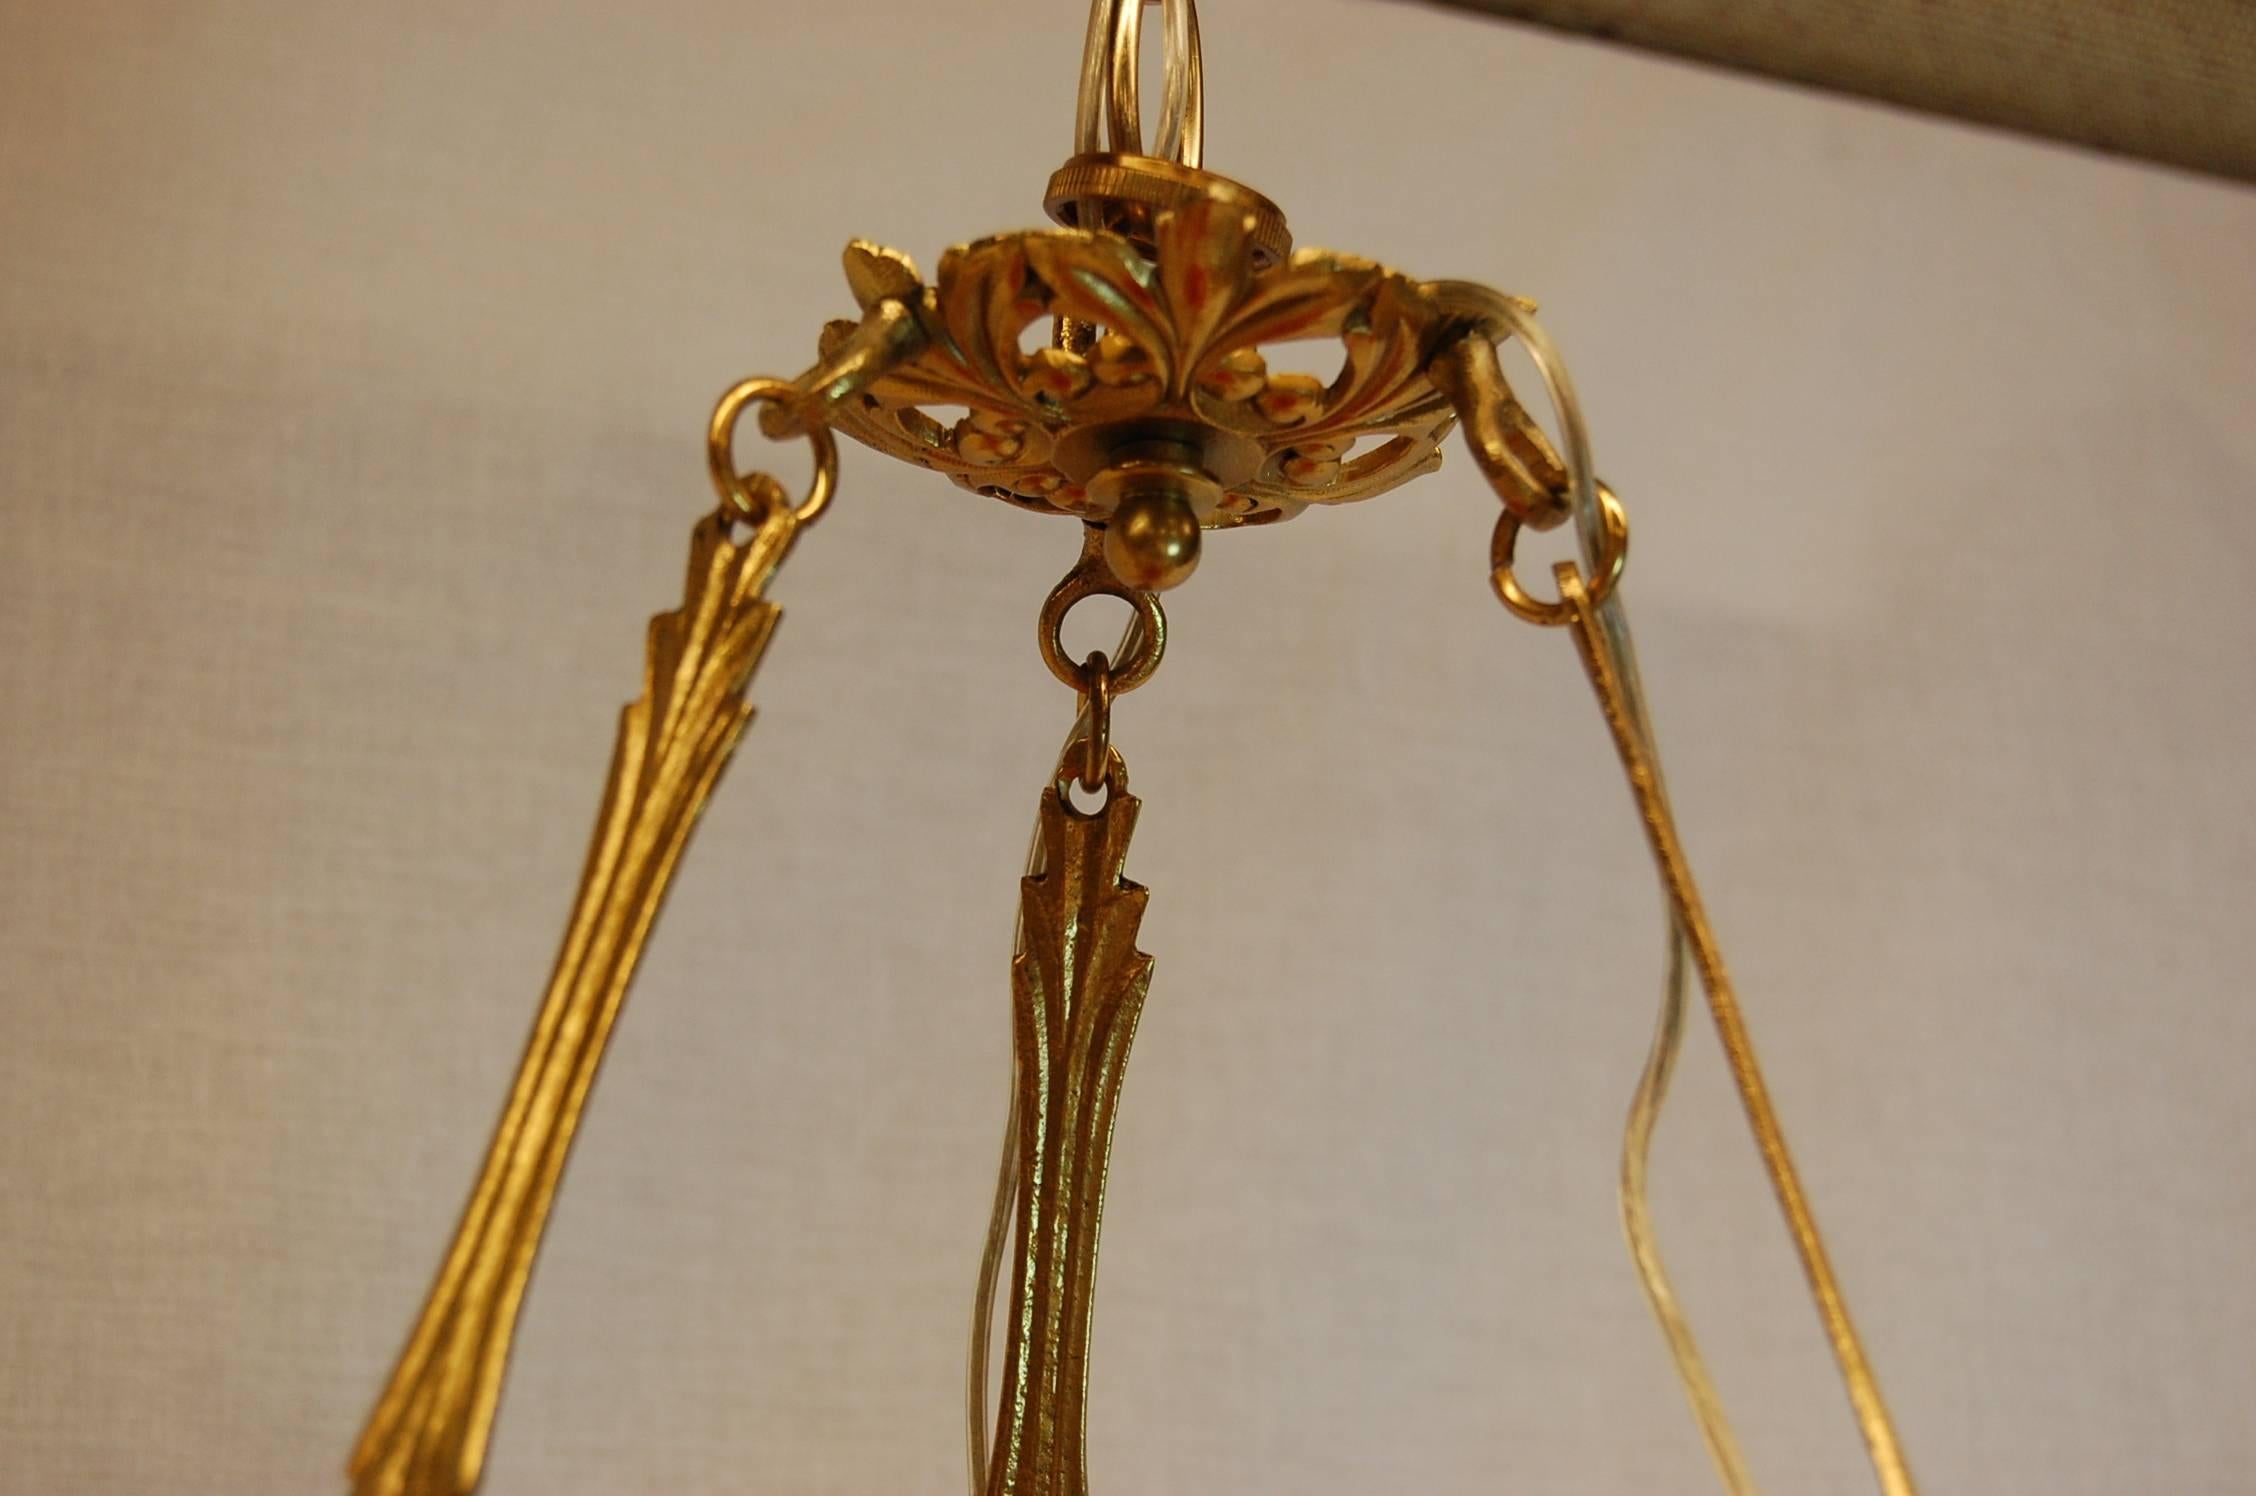 French Chandelier w/ Glass Lilies & Stamped Brass Decorations, Mid 19th Century For Sale 3